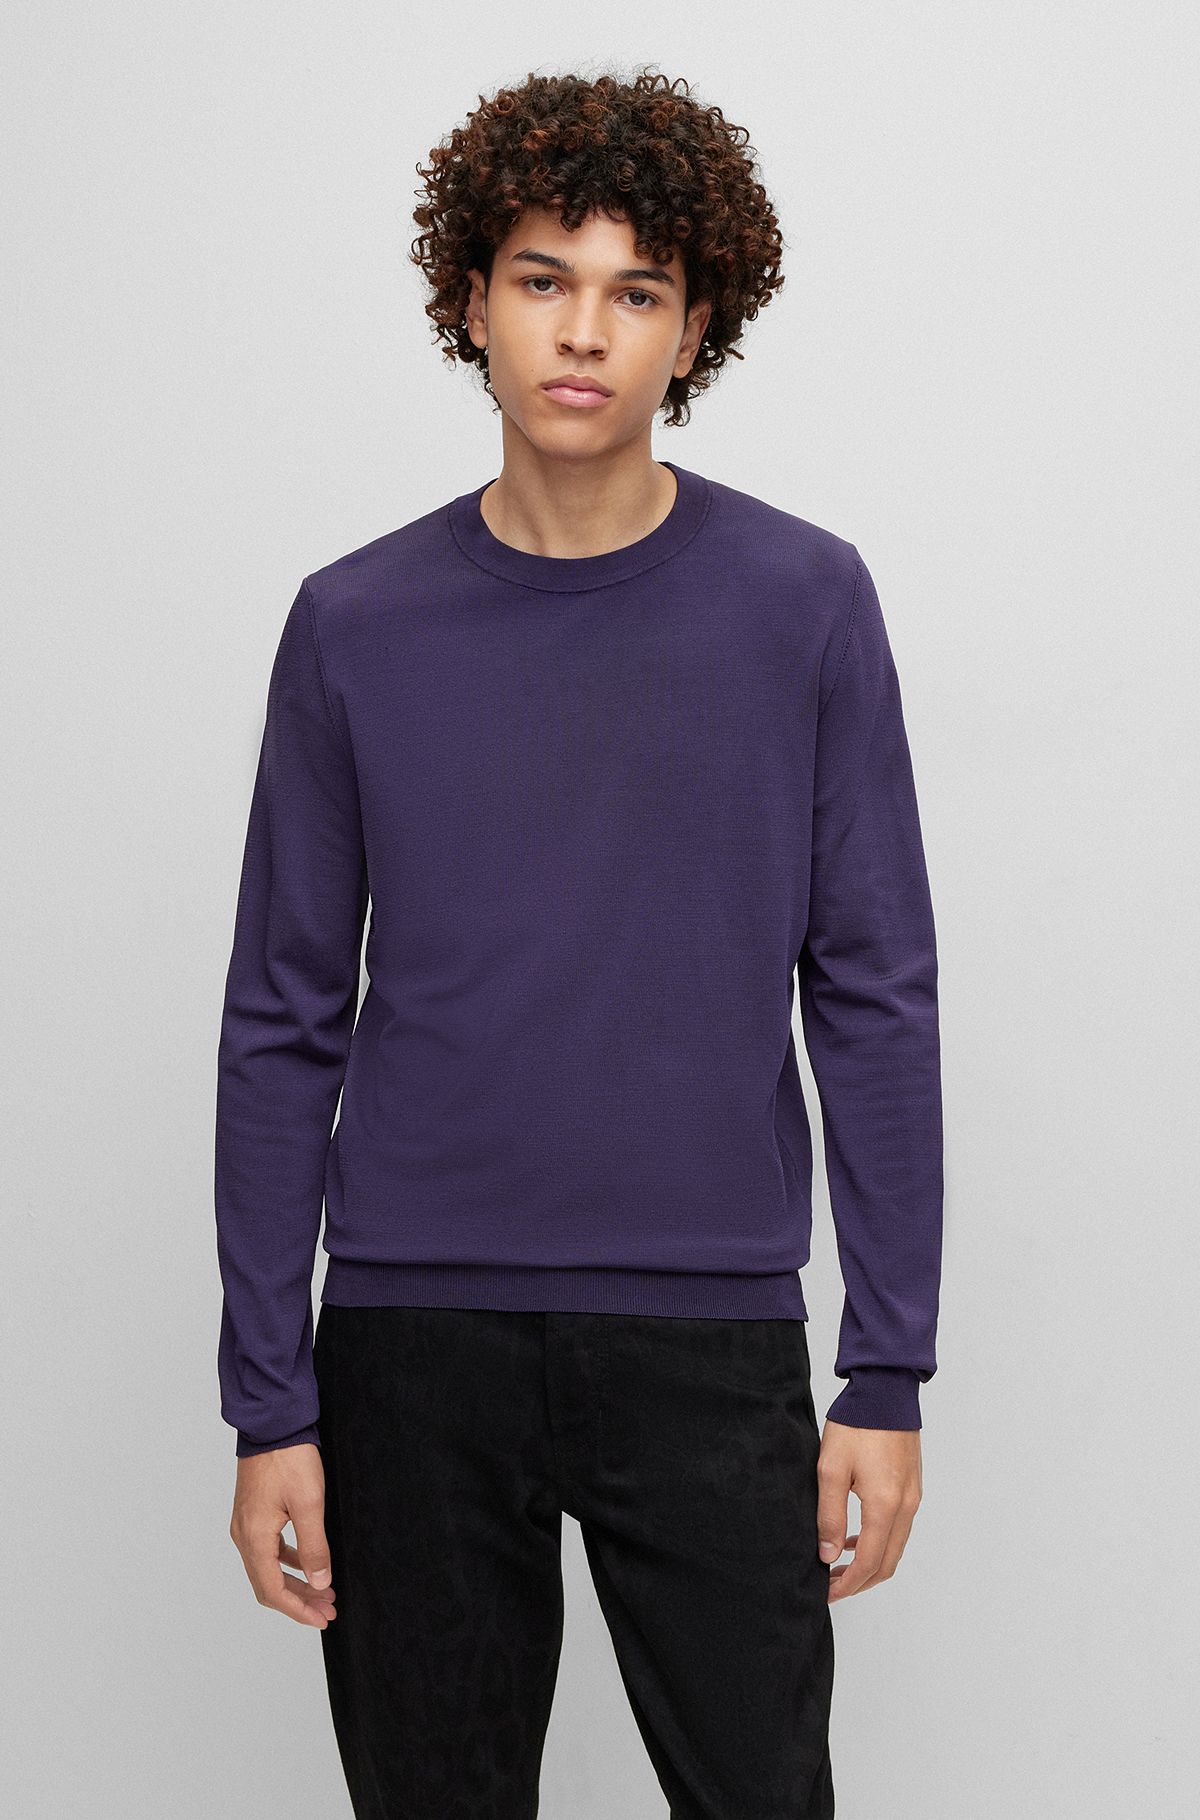 Sweaters and Cardigans in Purple by HUGO BOSS | Men